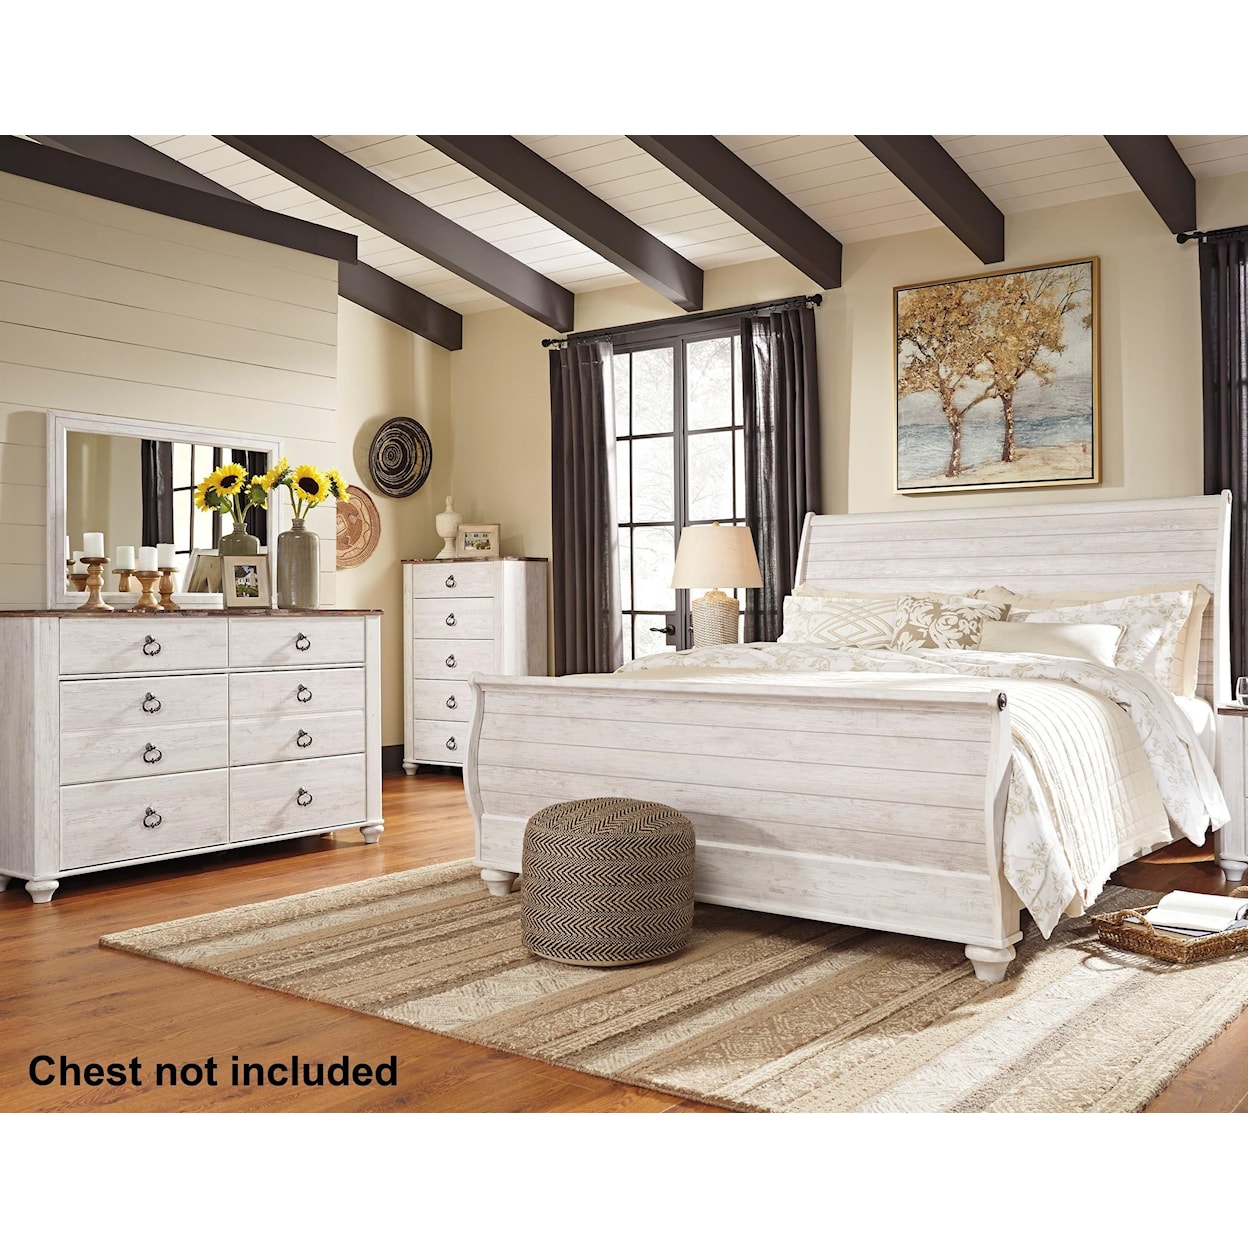 Signature Design by Ashley Furniture Willowton King Bedroom Group